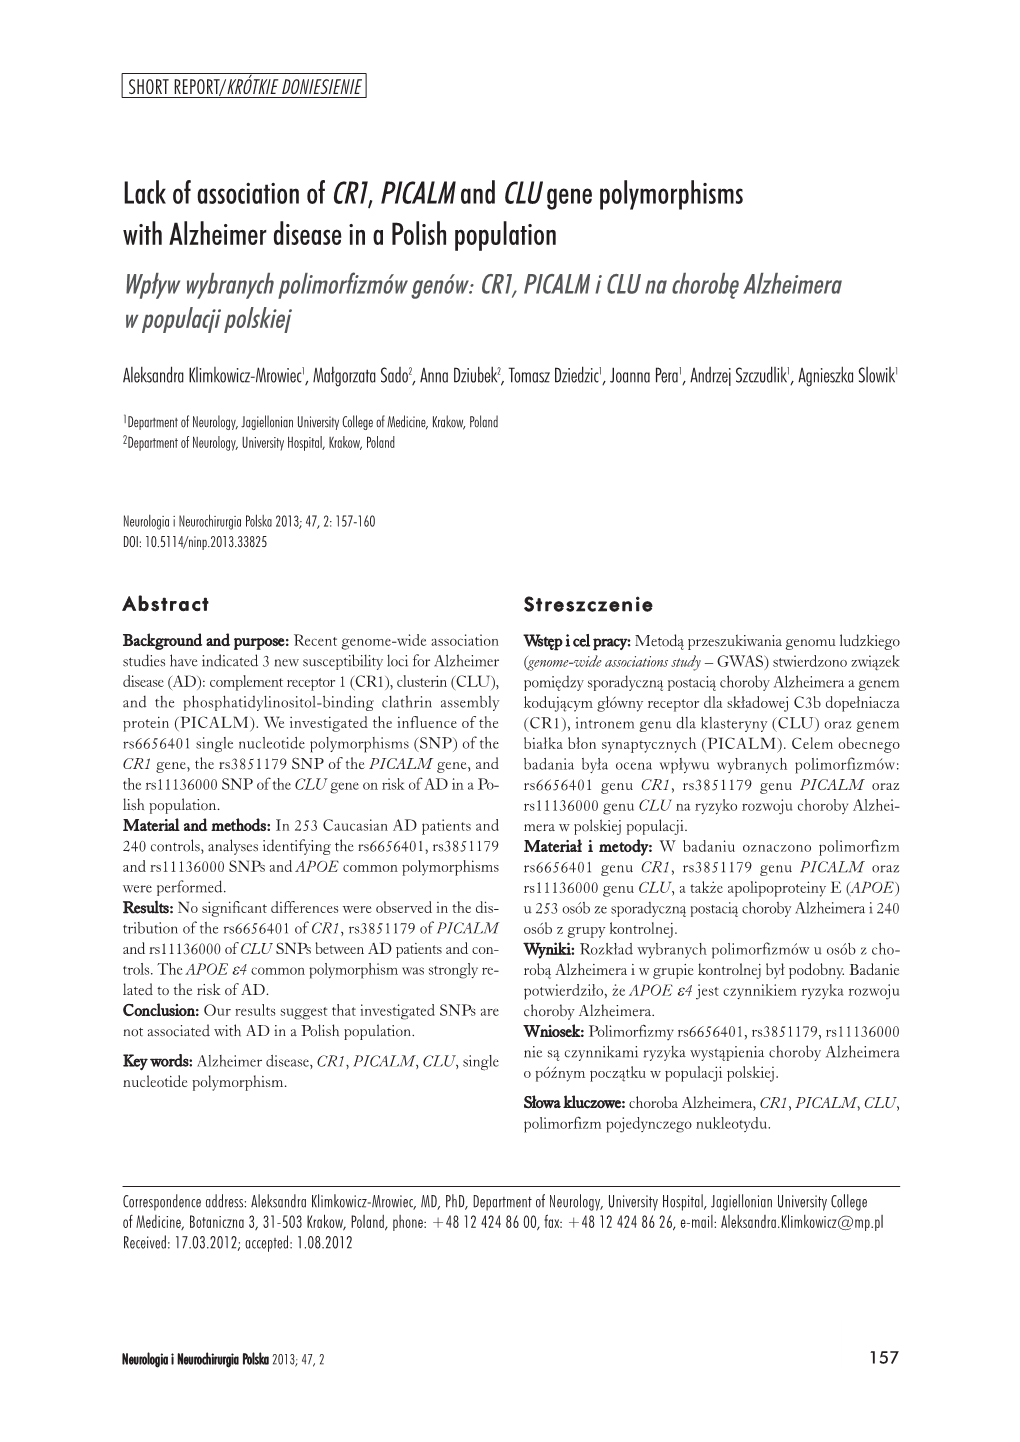 Lack of Association of CR1, PICALM and CLU Gene Polymorphisms With